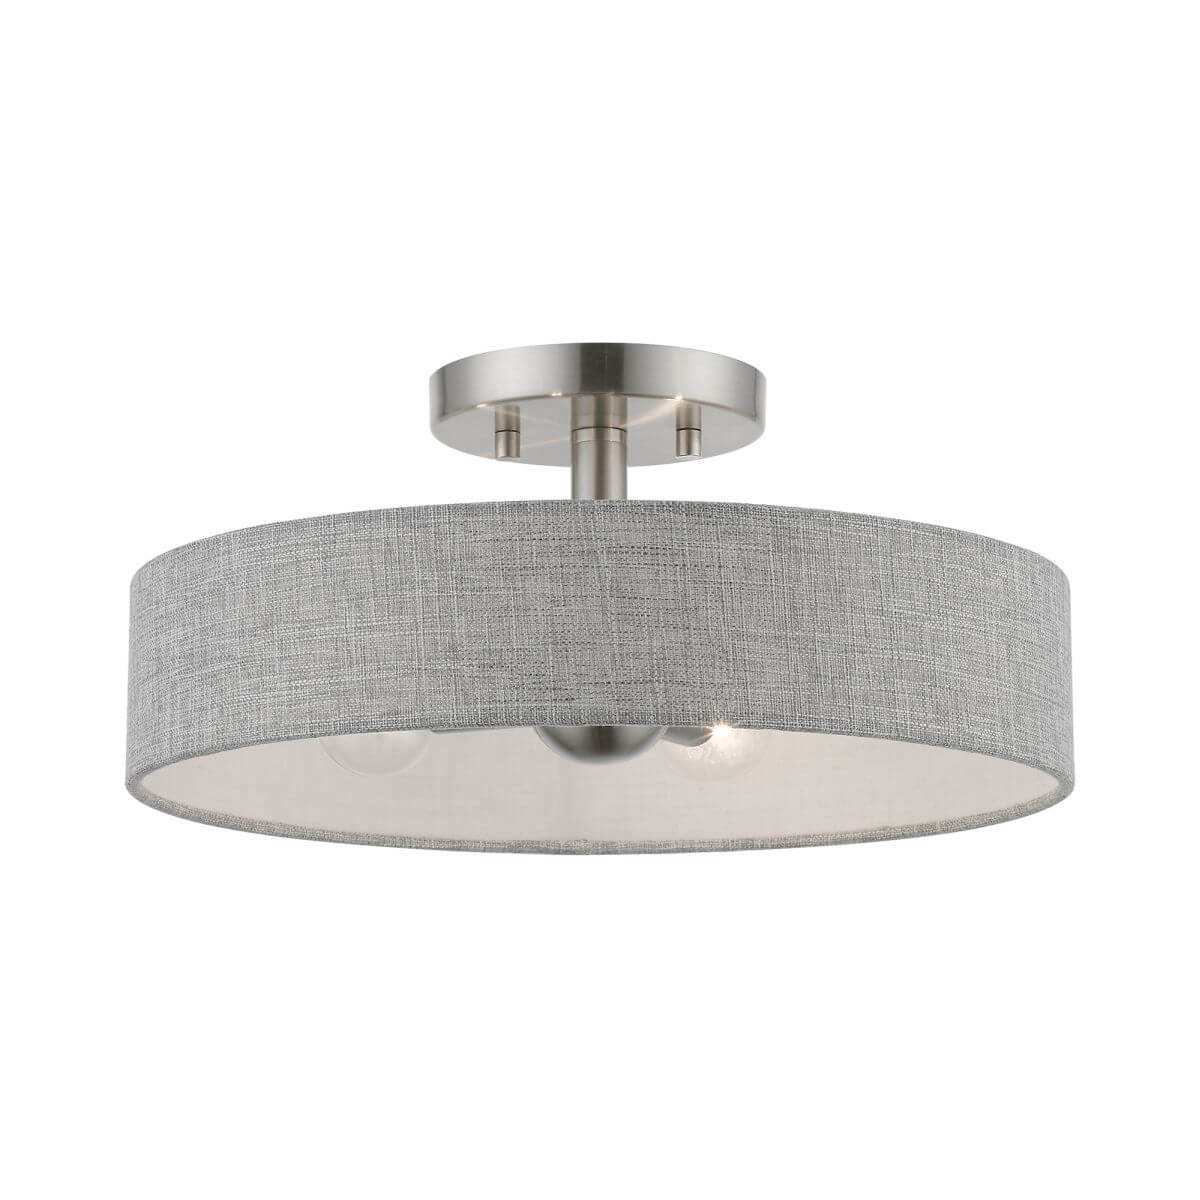 4 Light 14 inch Semi-Flush Mount in Brushed Nickel-Shiny White Accents with Hand Crafted Urban Gray Hardback Fabric Shade - White Inside - 245215